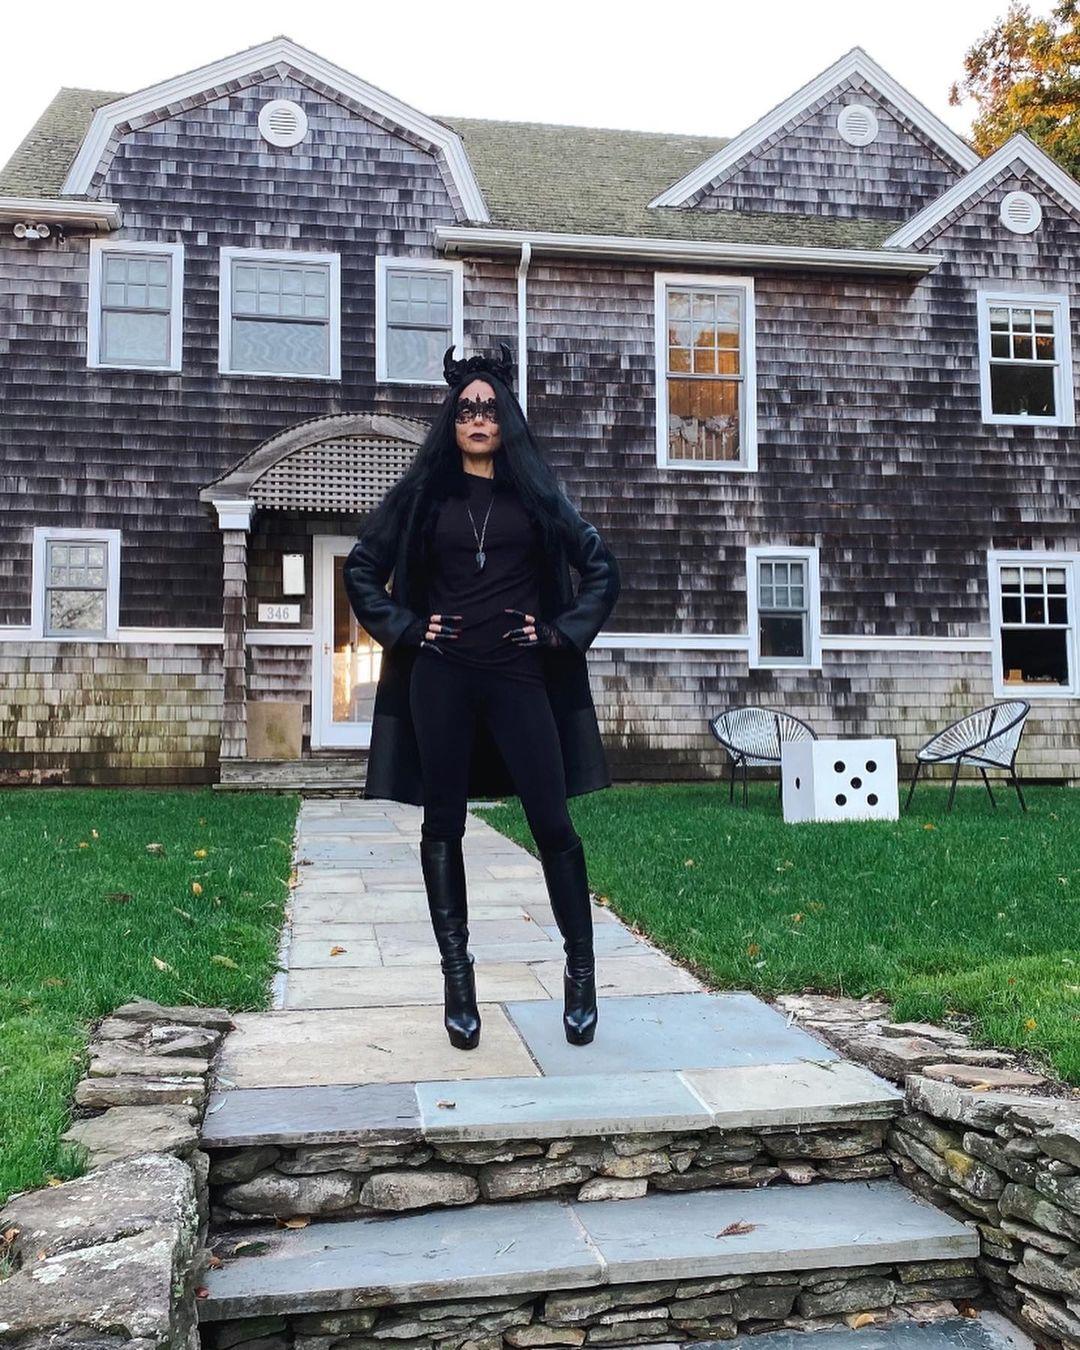 A photo showing Bethenny Frankel in a gorgeous all-black costume for Halloween.